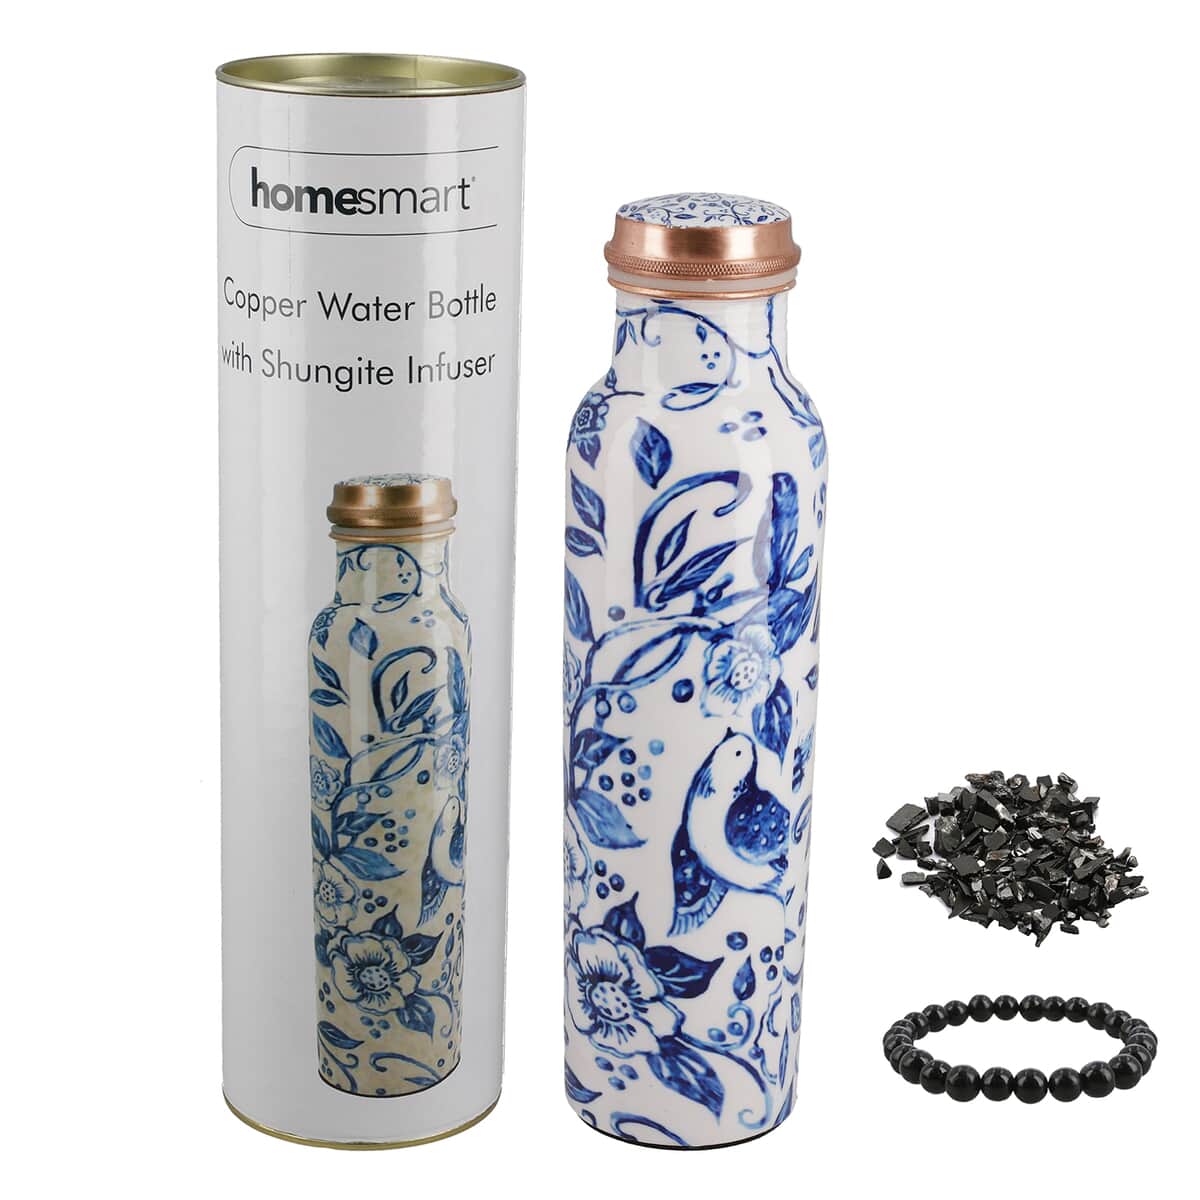 Homesmart Bird and Floral Printed Solid Copper Bottle with Shungite and Copper Infuser 33.81 oz image number 0